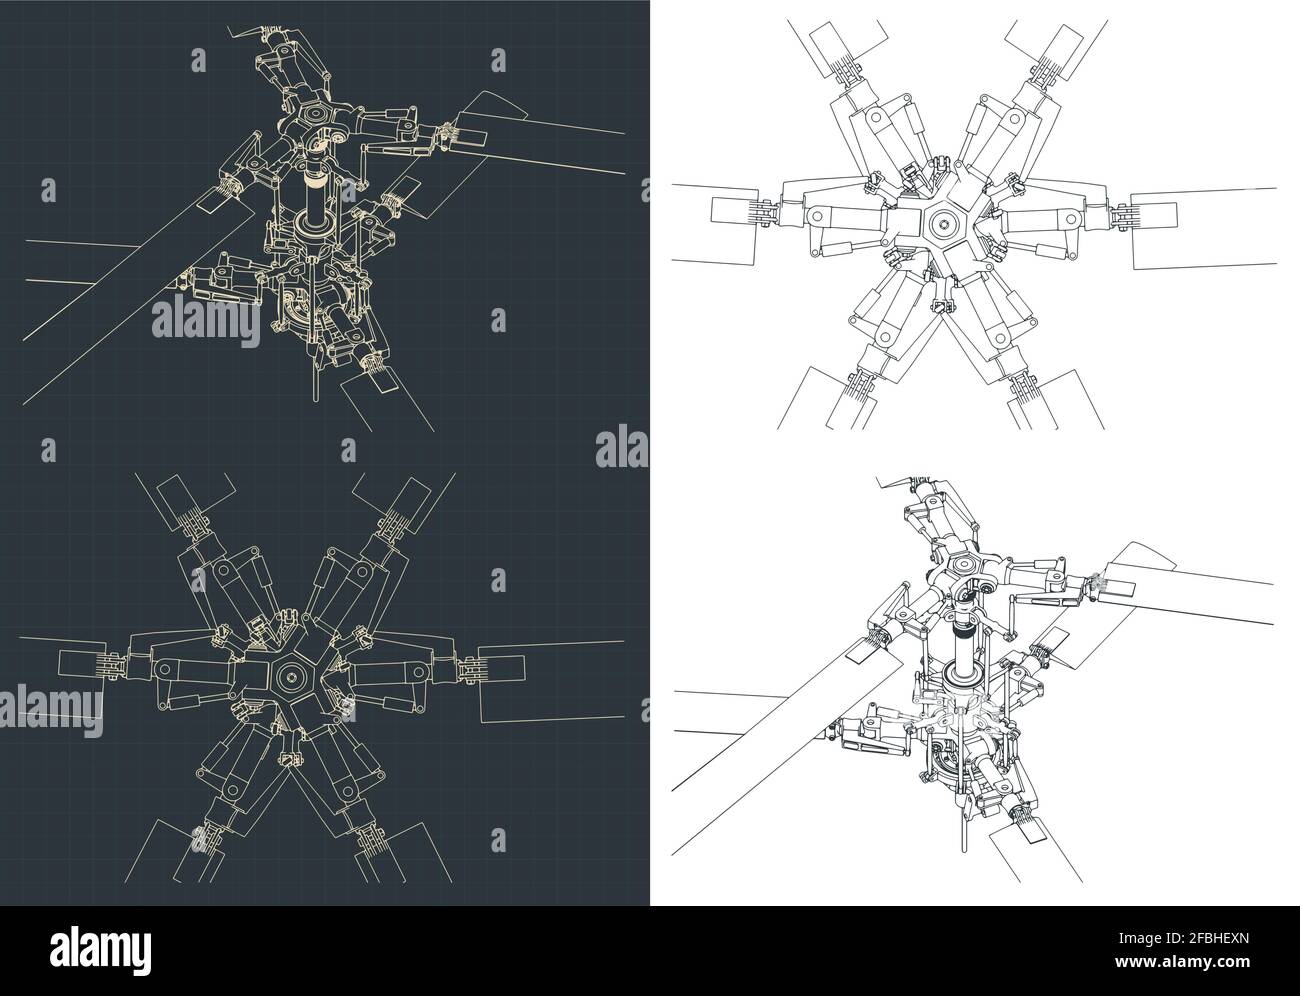 Stylized vector illustrations of mechanism of helicopter coaxial main rotor drawings Stock Vector